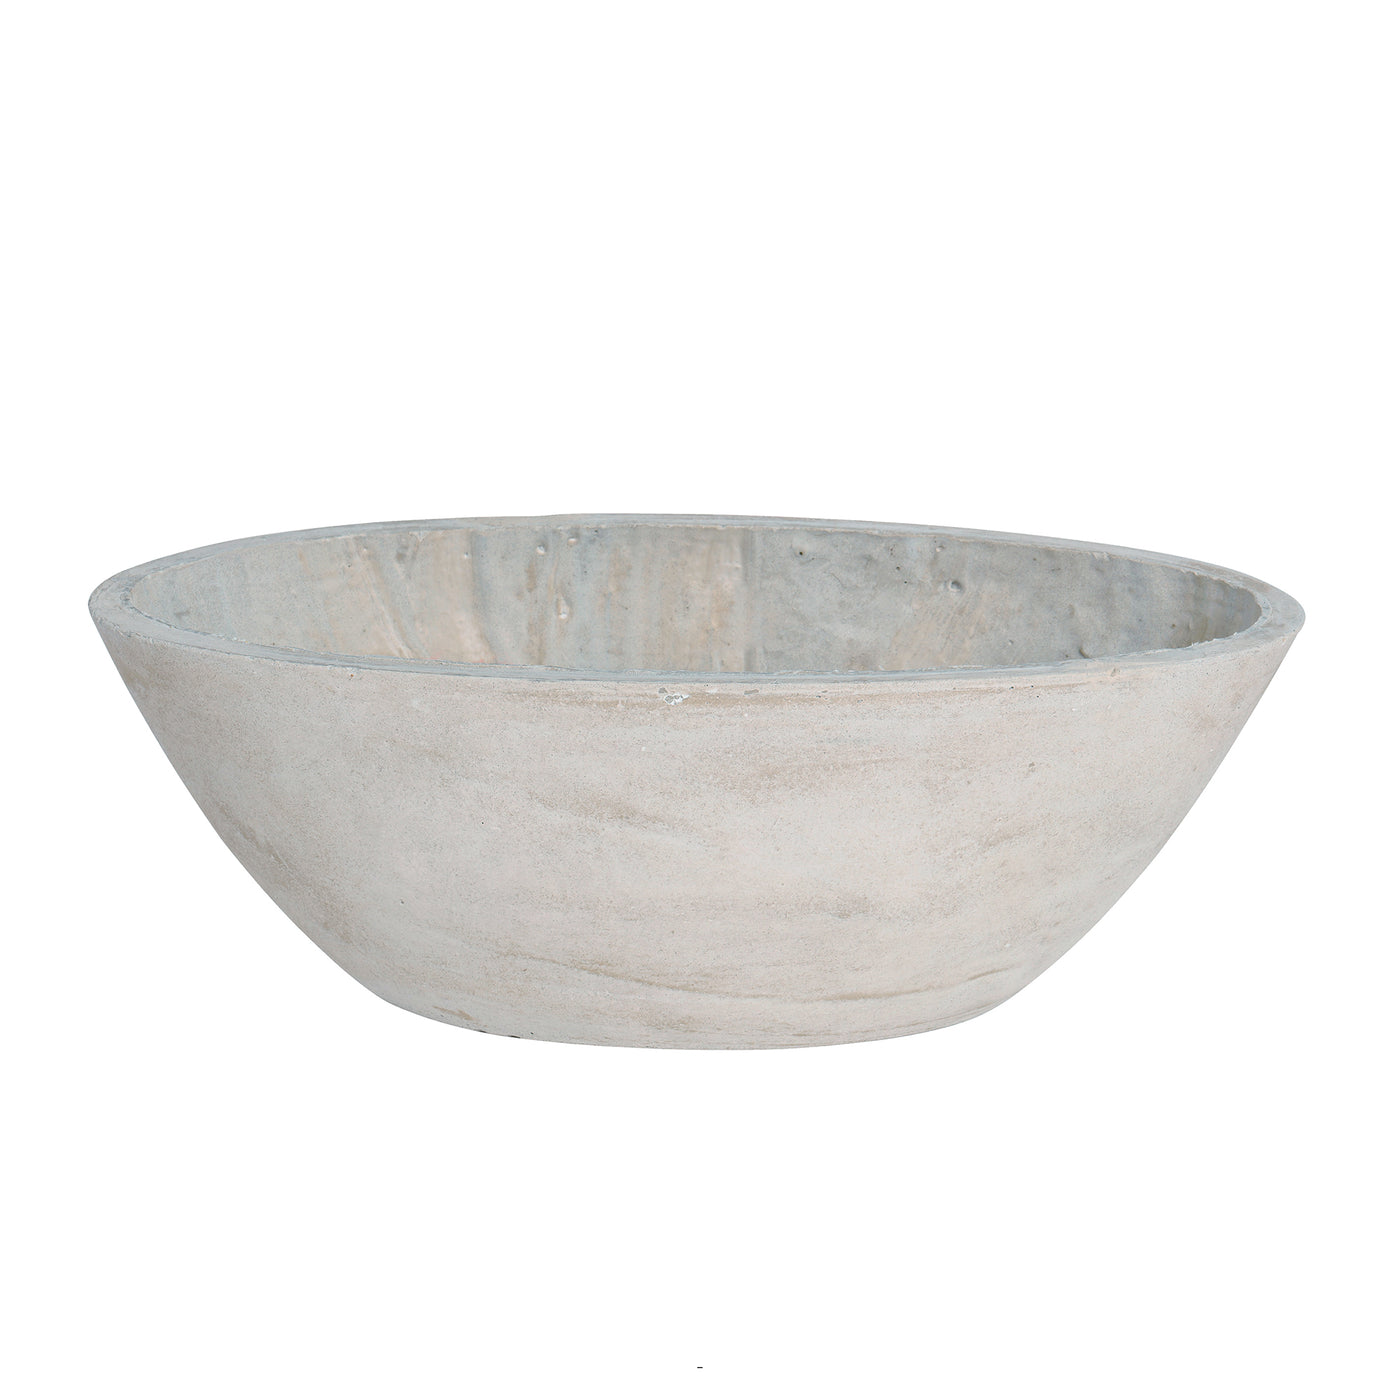 Contemporary oval stonecast planter in light grey